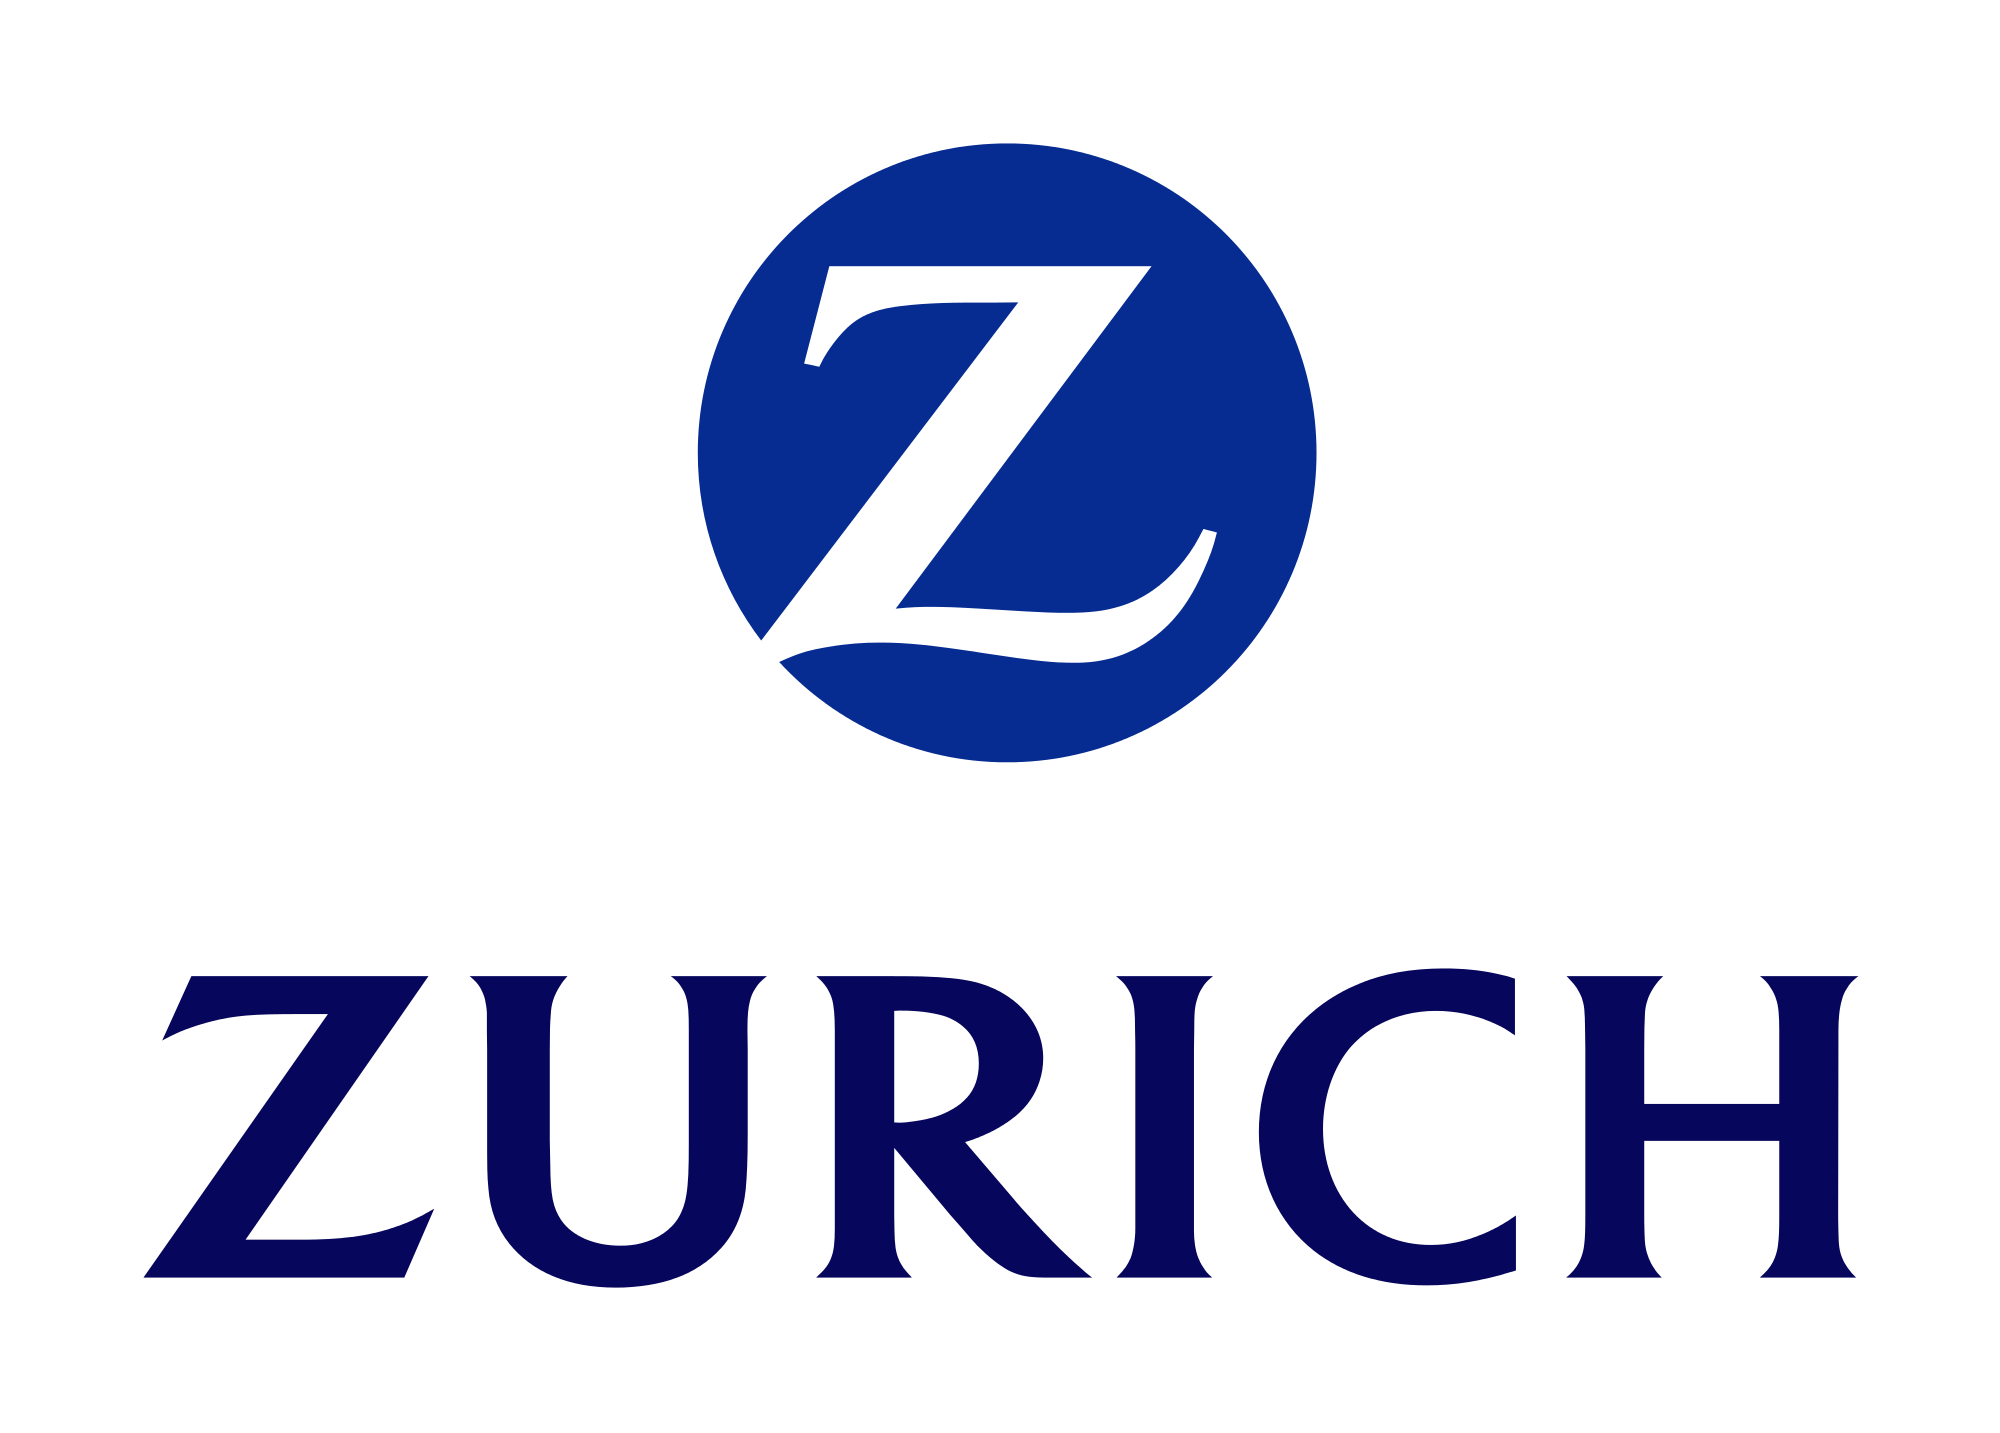 Zurich P&C profits up 50%, aided by top-line growth